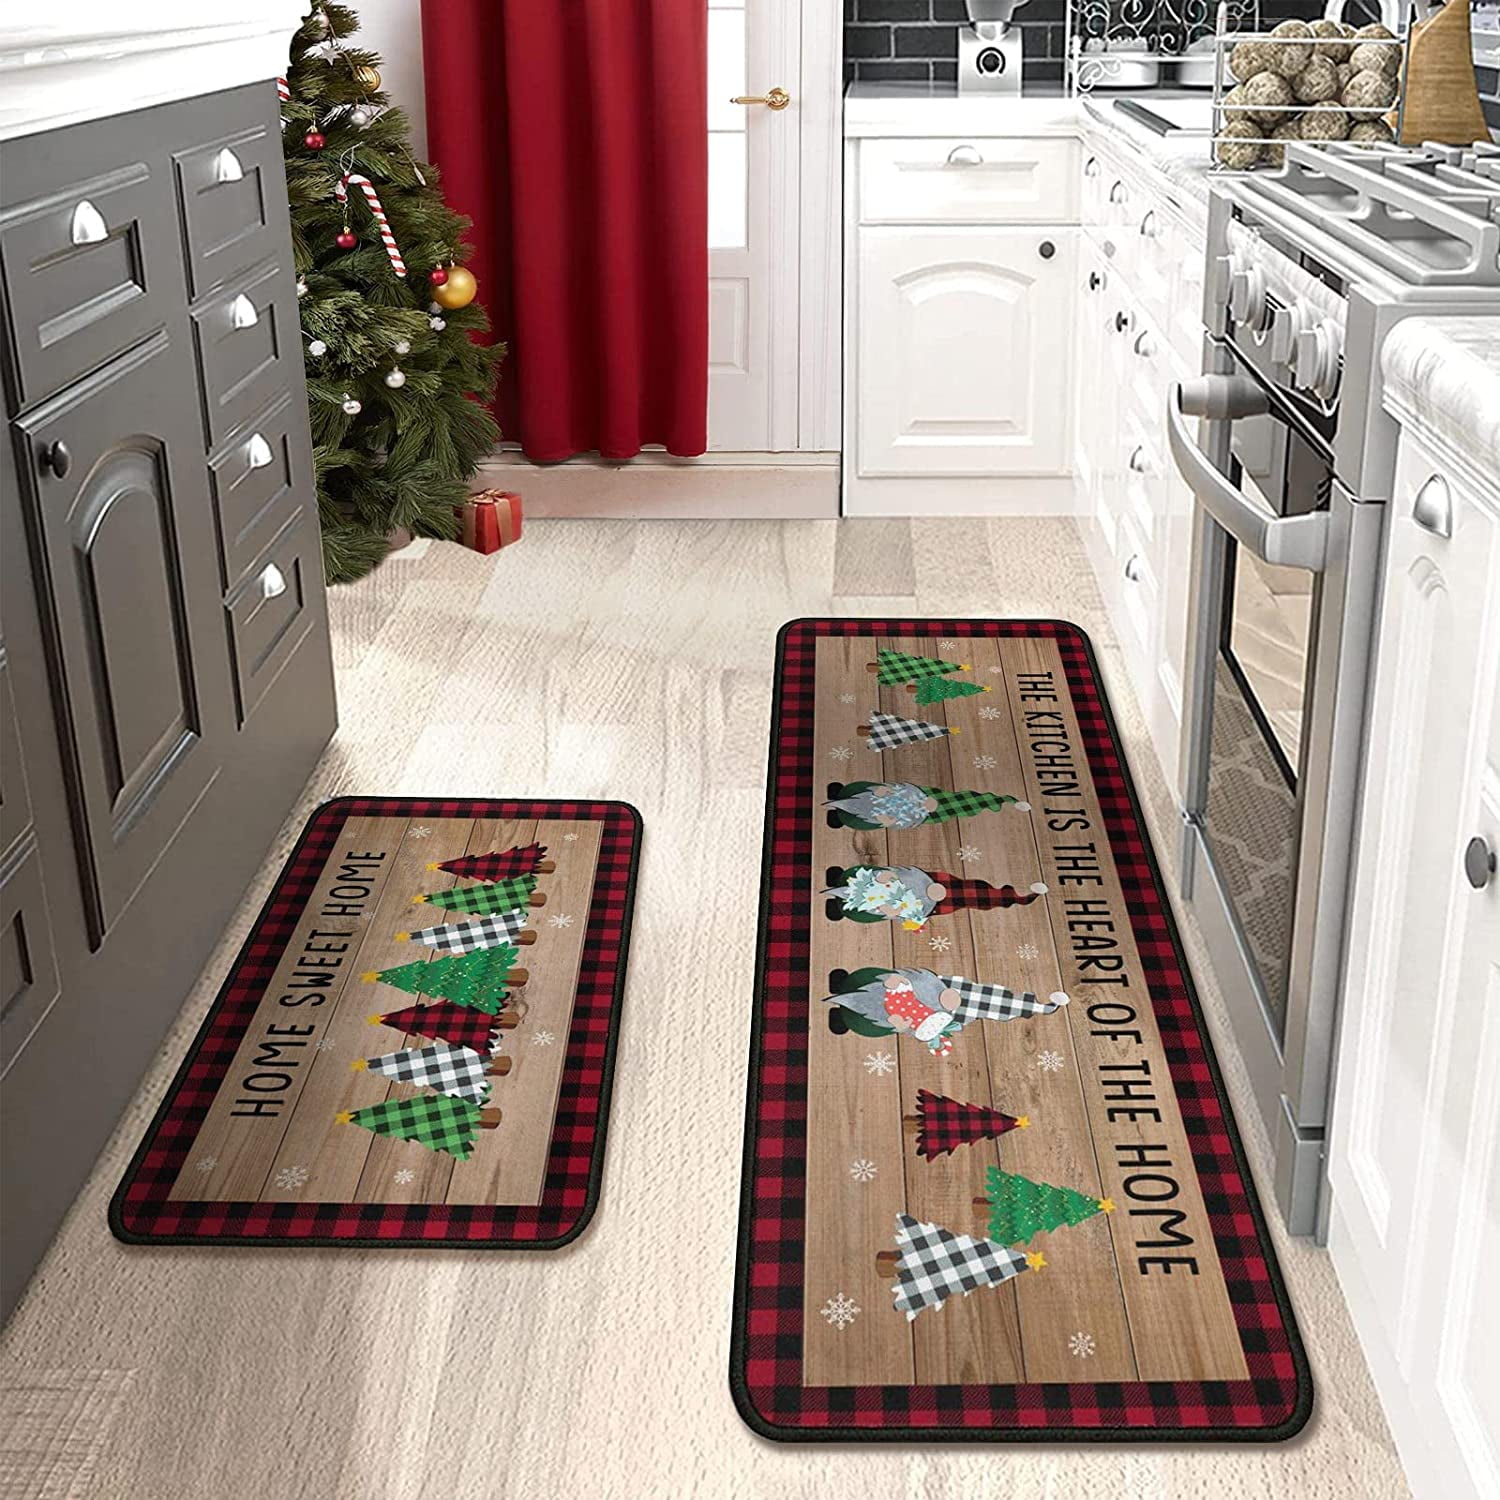 Red and Black Buffalo Plaid Kitchen Decor Rugs Set 2 Piece, Farmhouse Style  Home Indoor Kitchen Rugs and Mats Non Skid Washable 17x47+17x30 Inches